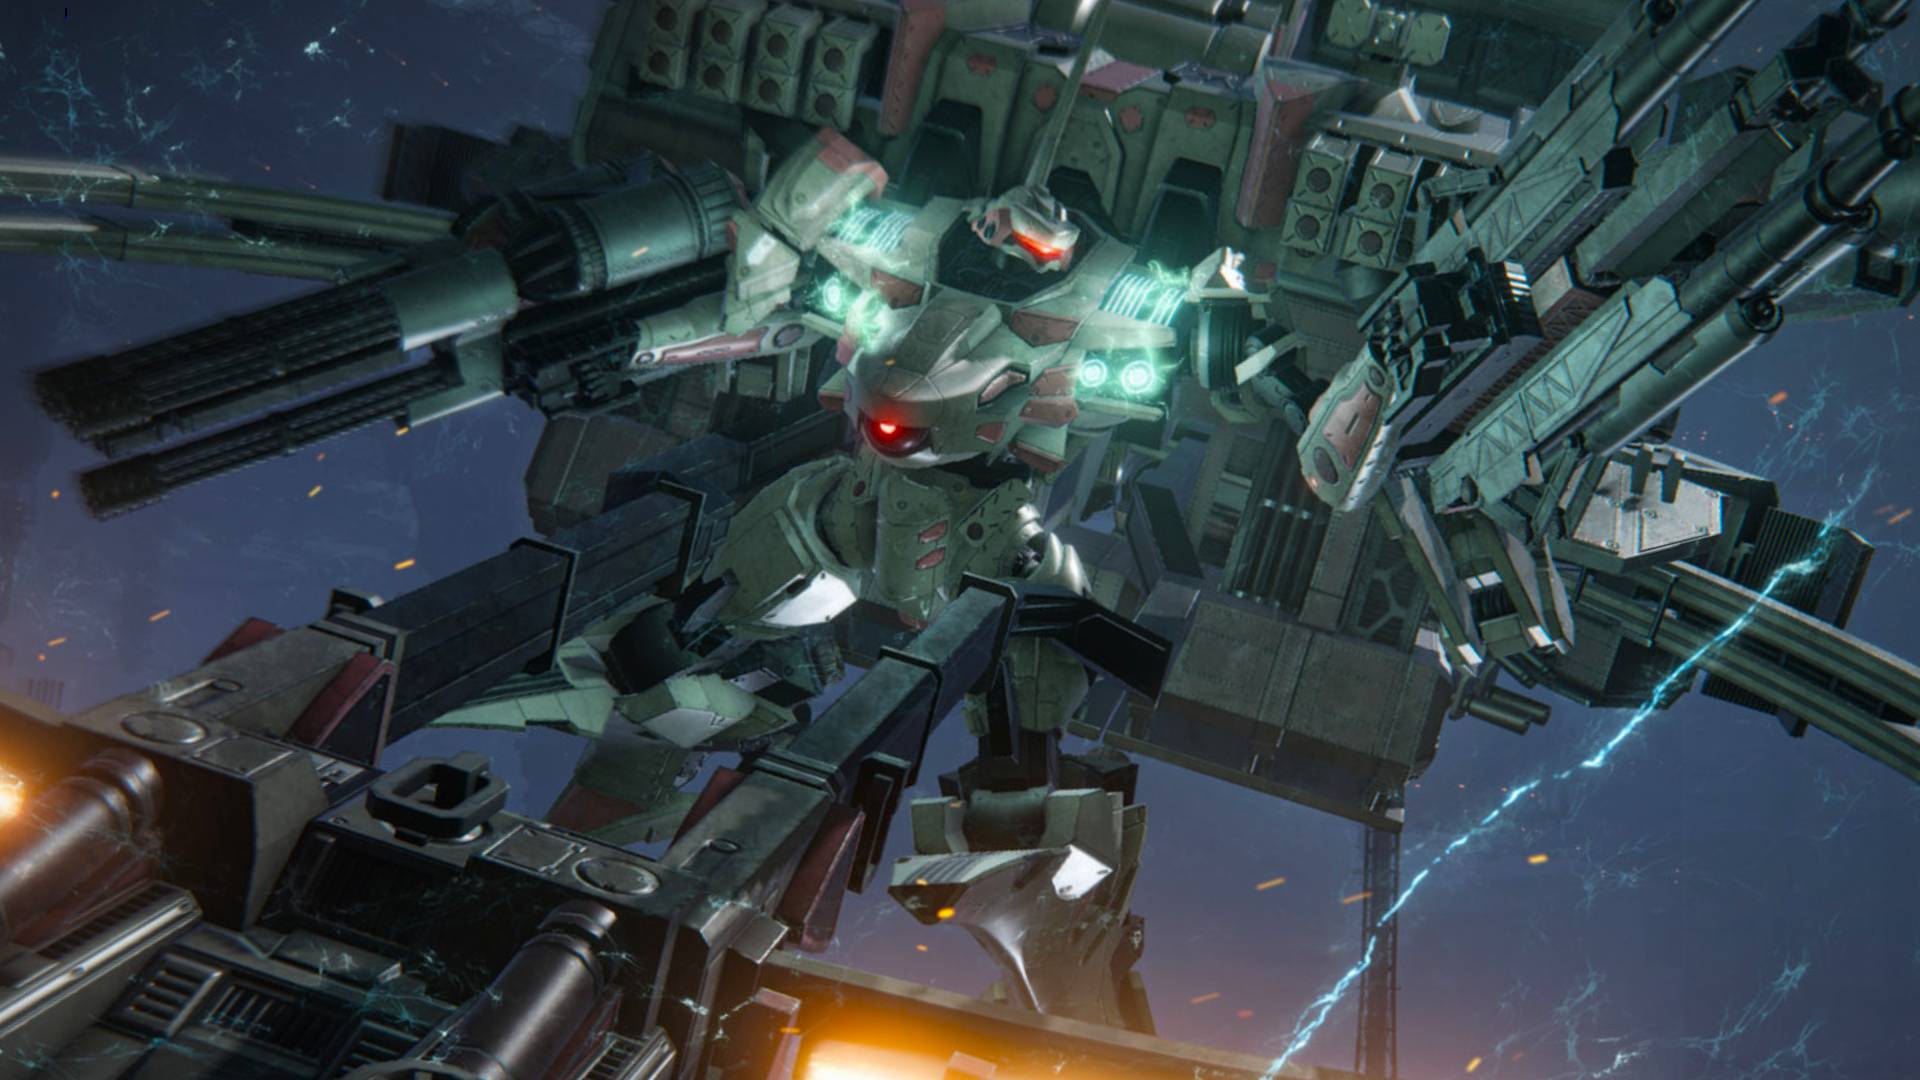 The Game Awards on X: 21 years ago today, ARMORED CORE 3 was